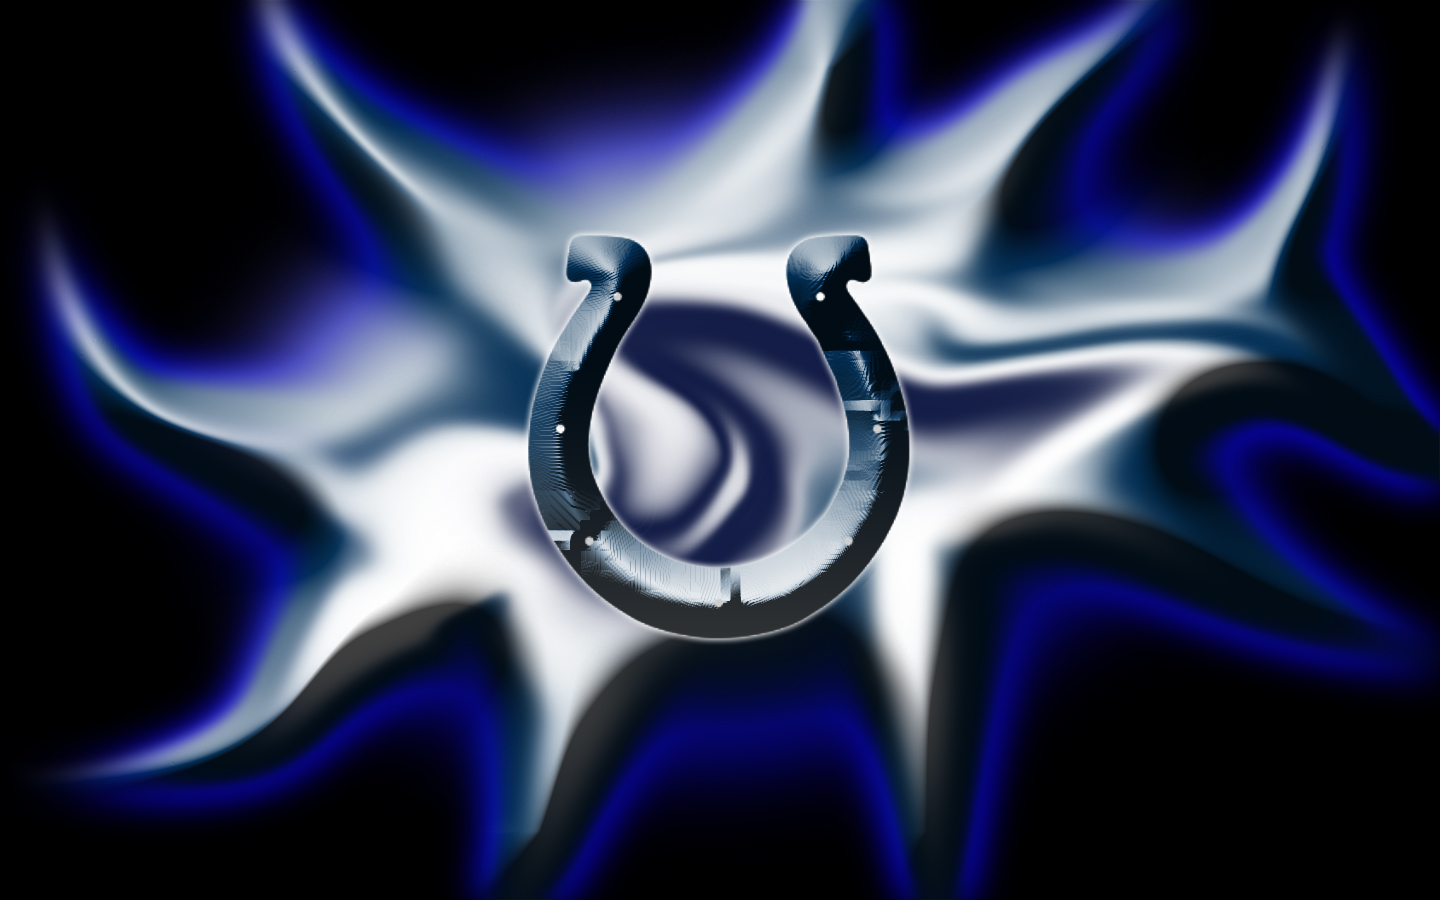 Hope You Like This Indianapolis Colts Wallpaper HD Background As Much